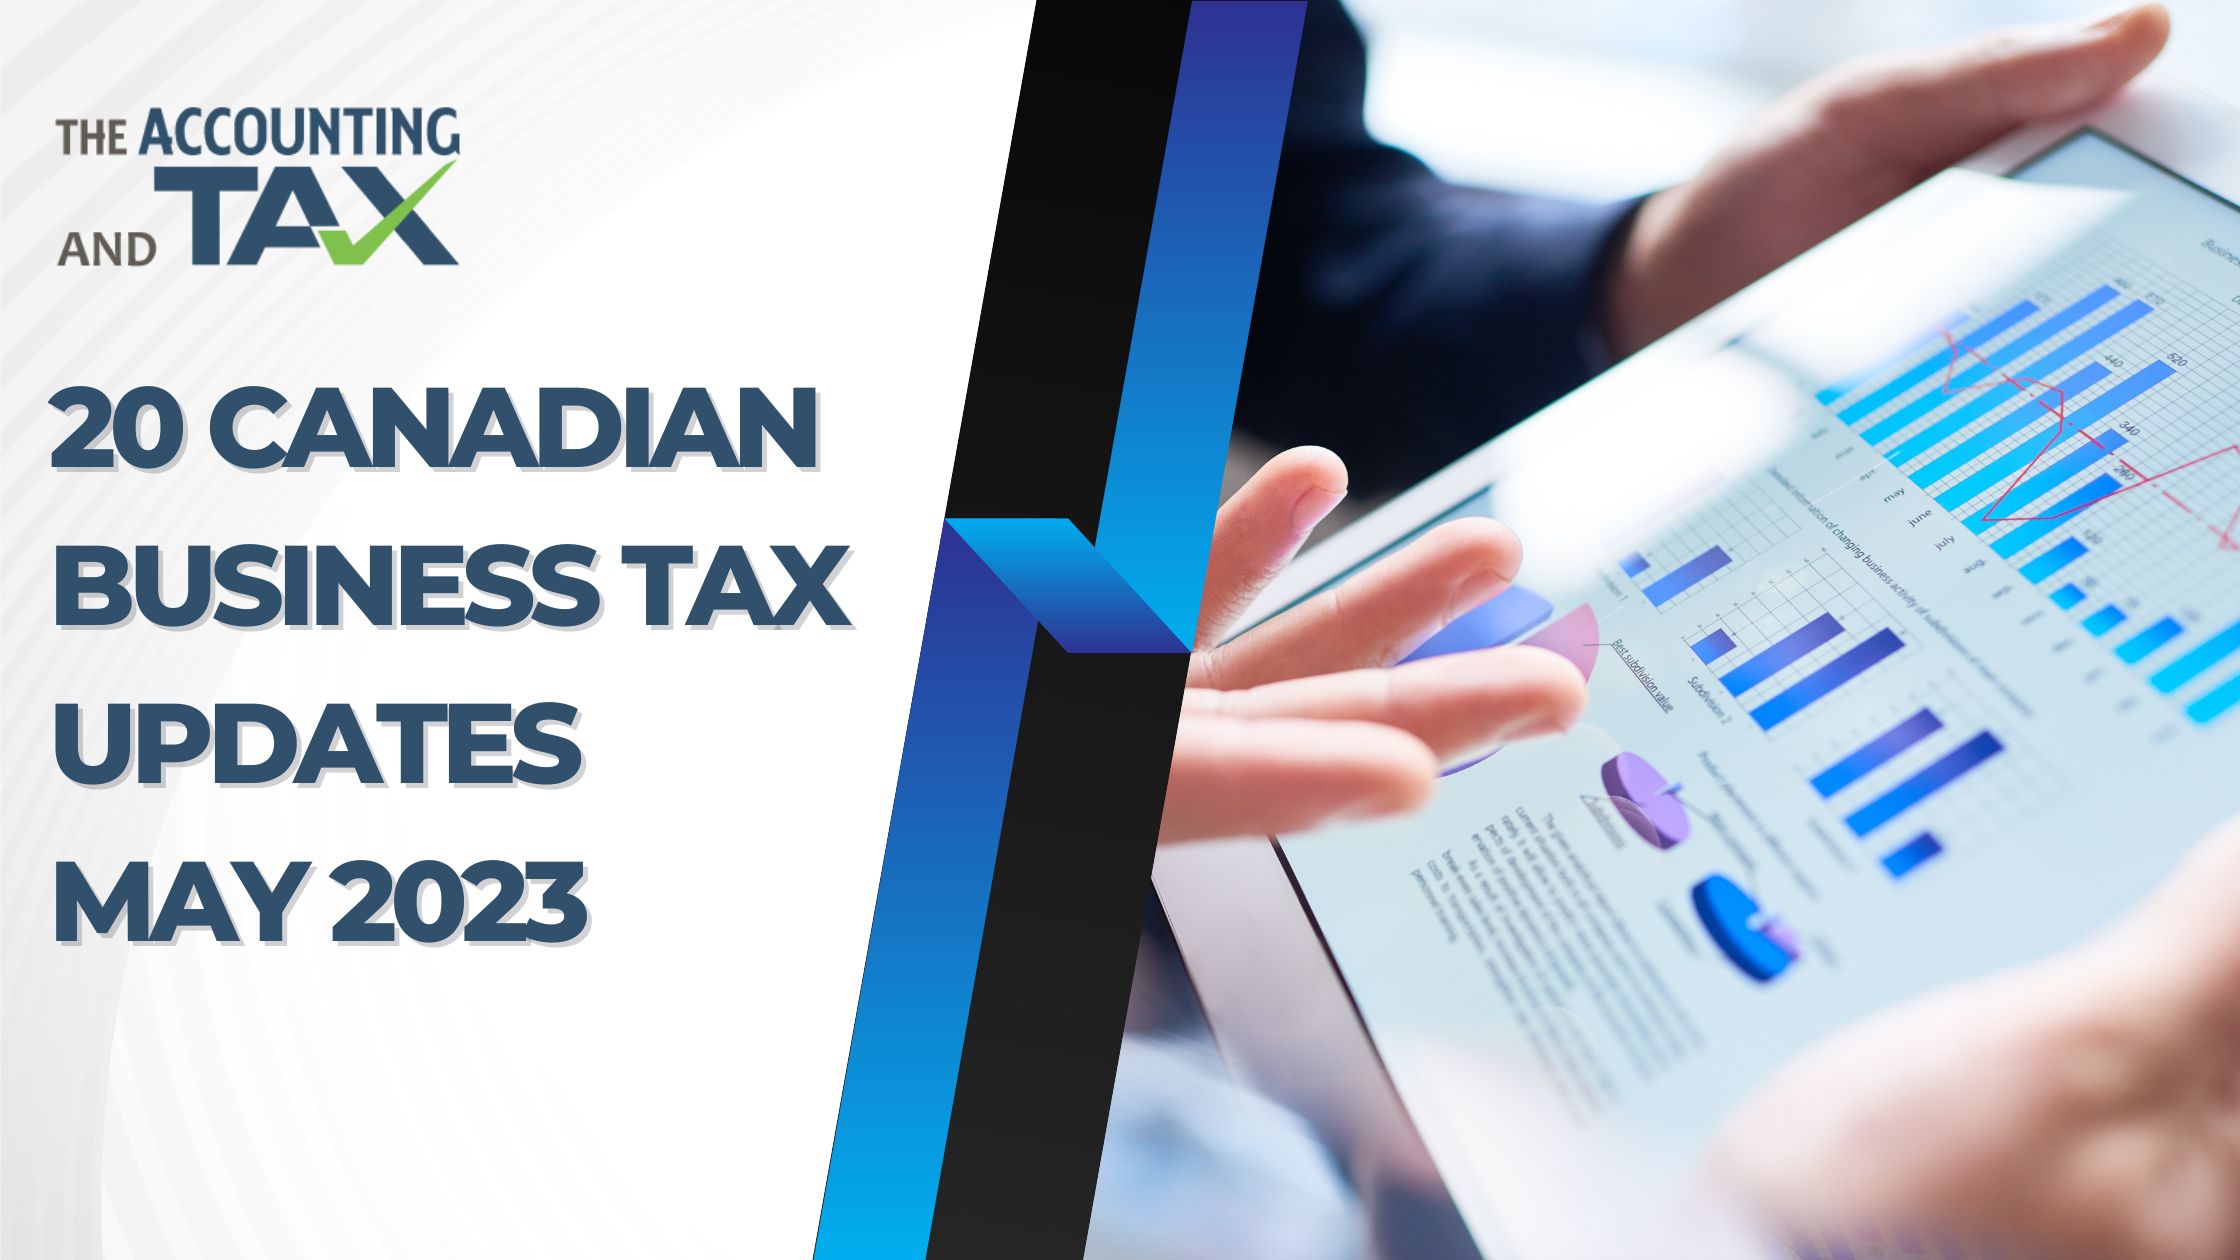 Canadian business tax updates for May 2023